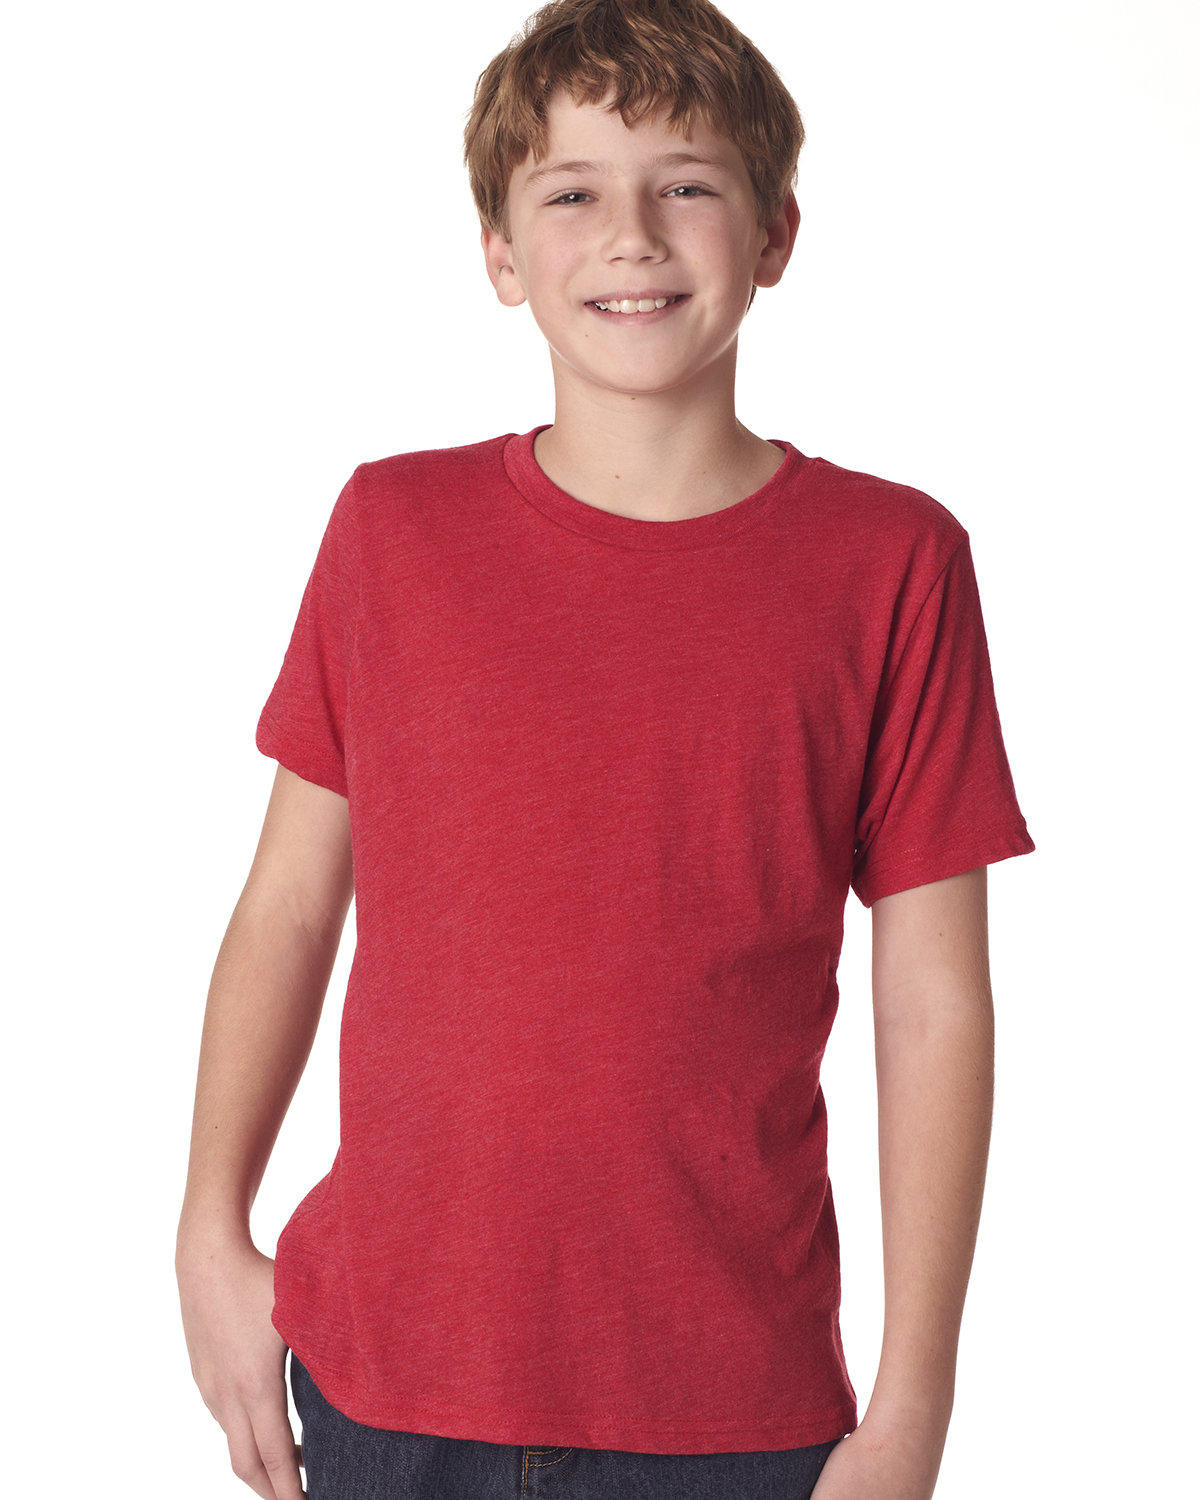 Next Level Apparel Youth Triblend Crew VINTAGE RED 